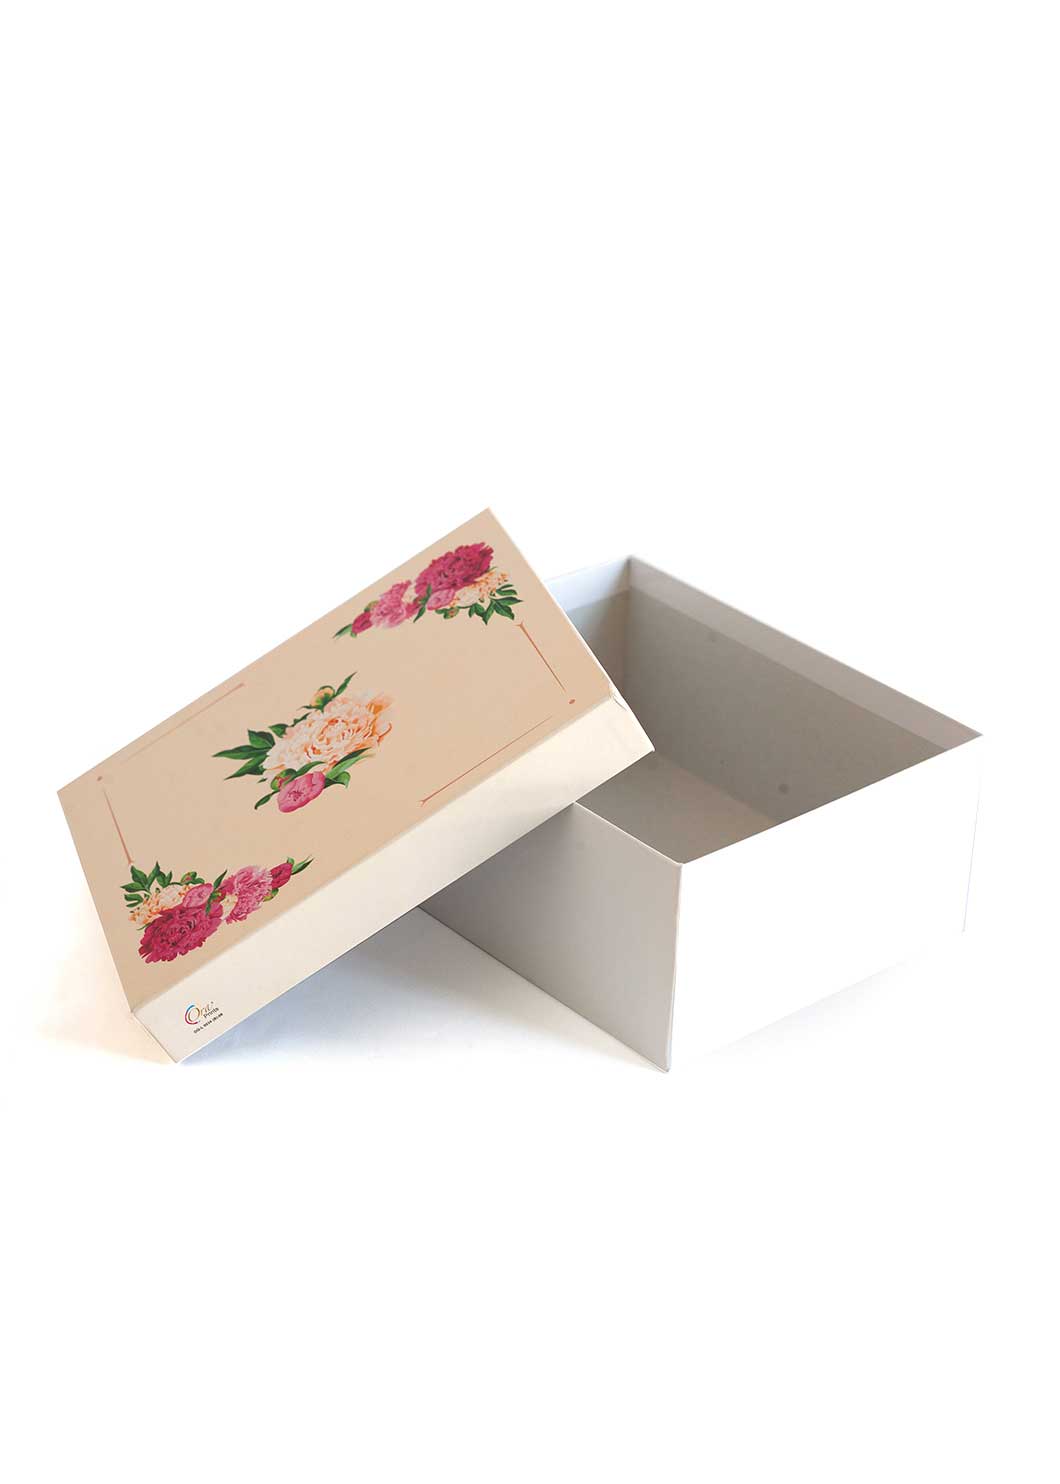 white box with pink top gift packaging empty box- red and yellow flower design cover gift packing box- empty box in wholesale prices